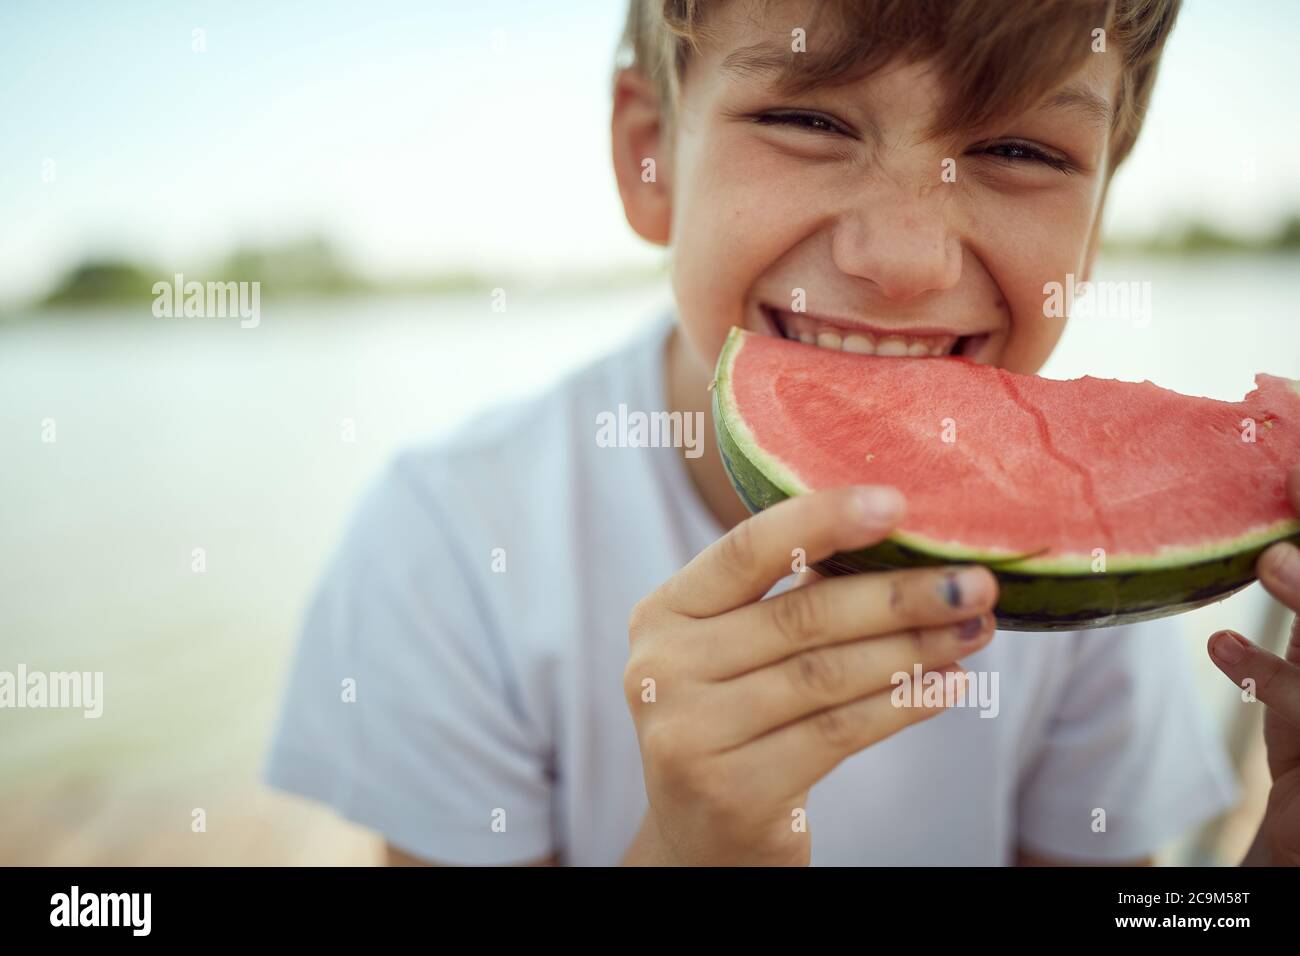 Young boy eating a watermelon on a hot day Stock Photo